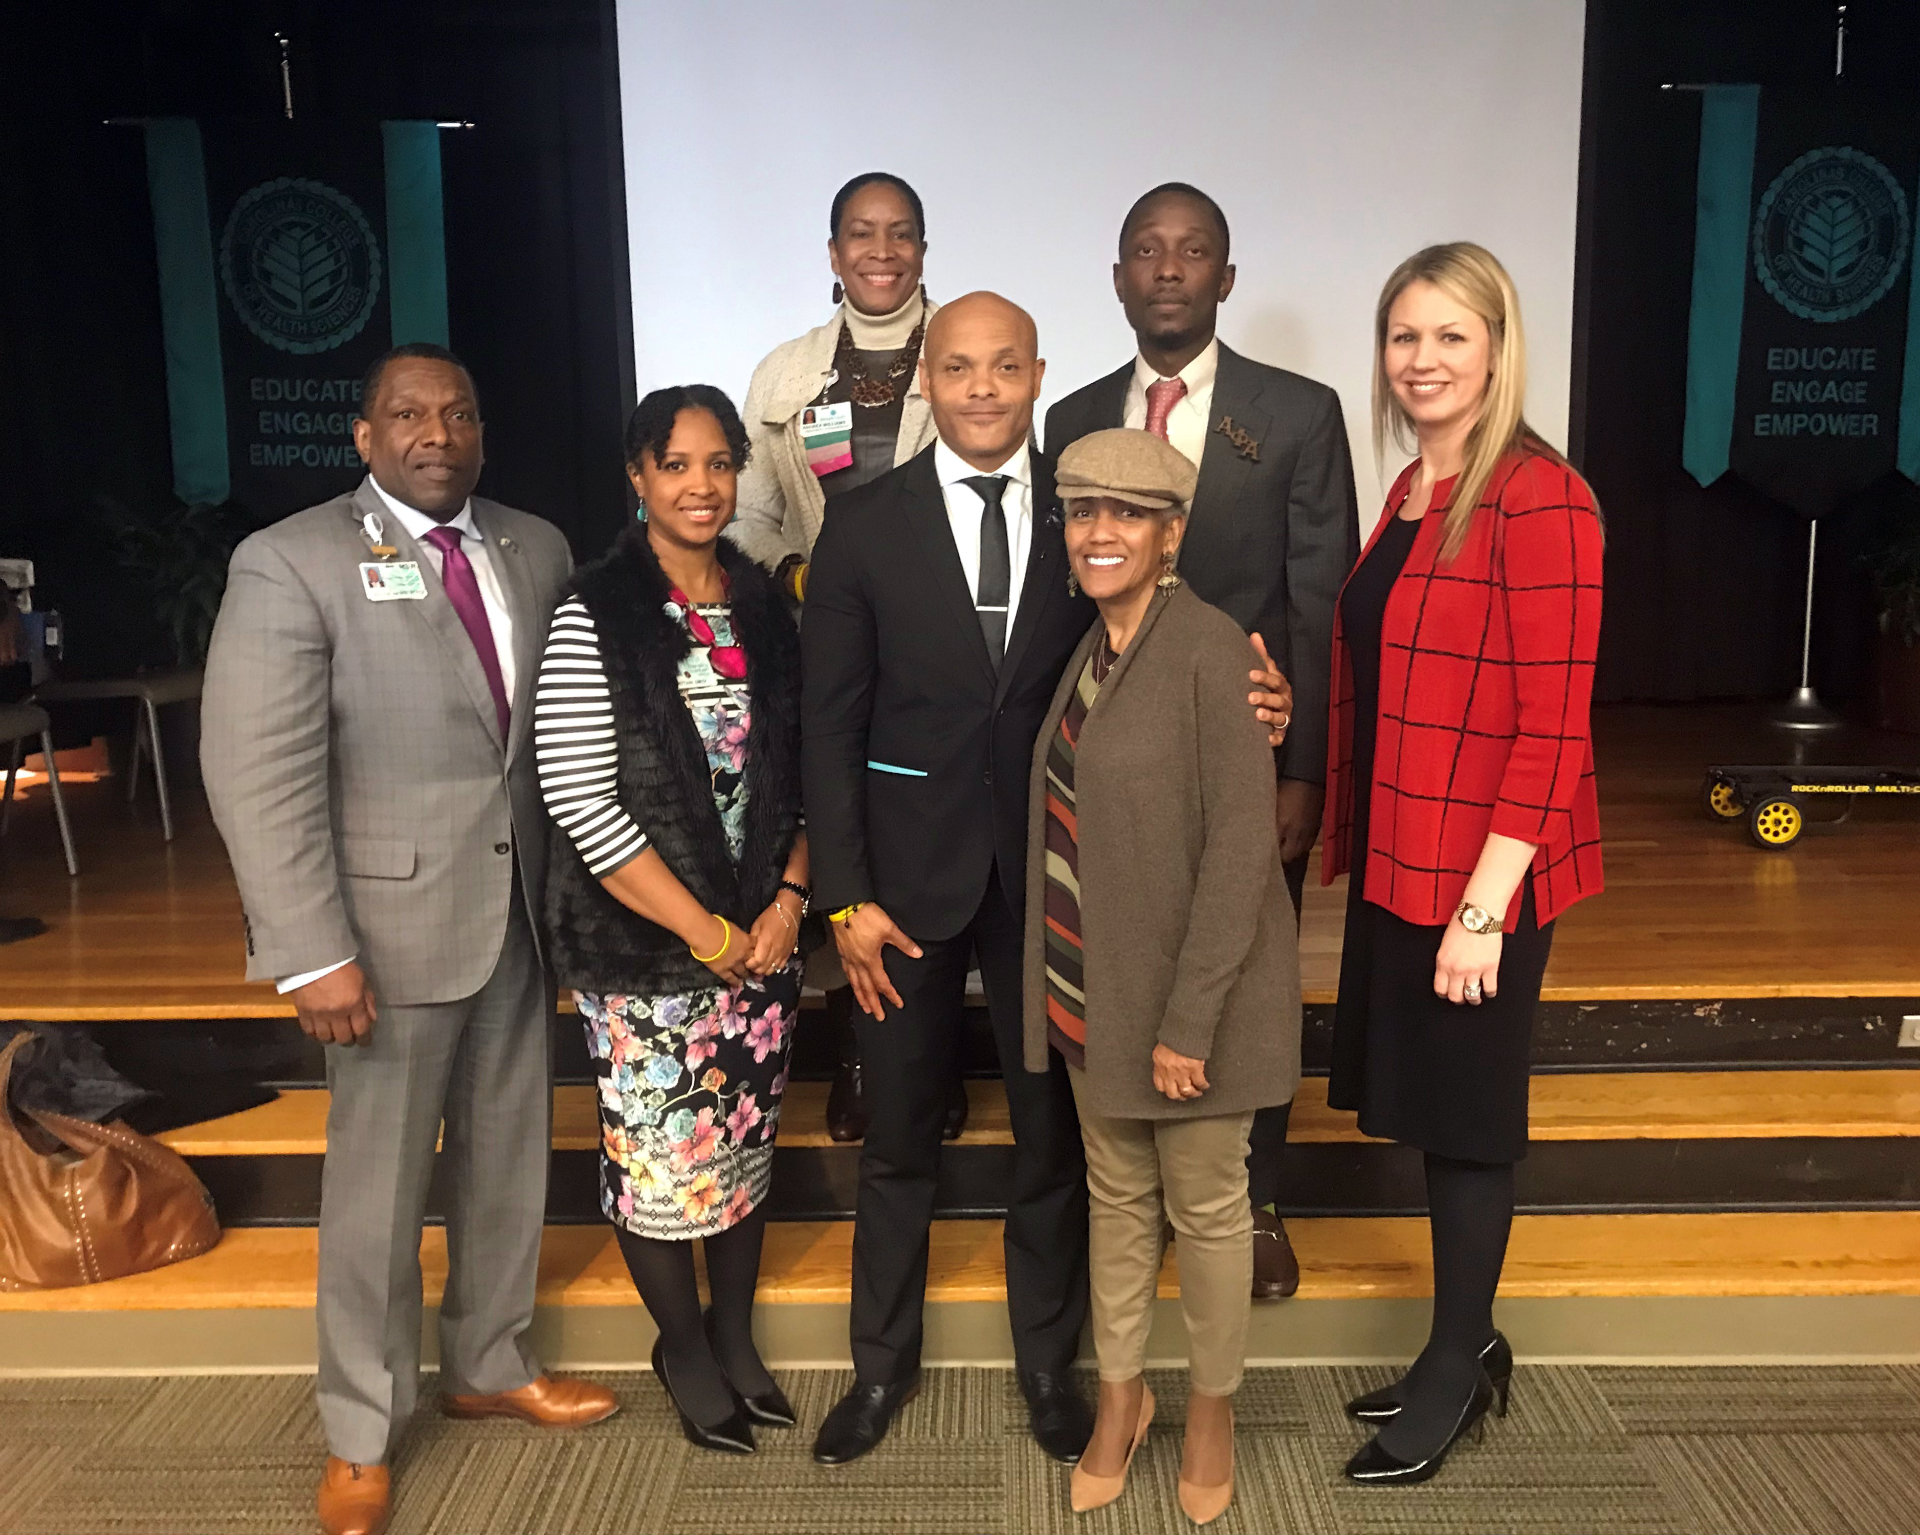 Atrium Health's Carolinas College of Health Sciences hosted its 14th Annual Martin Luther King Jr. Luncheon on Jan. 21, 2019, featuring Toussaint Romain, a civil rights activist and community organizer in Charlotte, who challenged the audience to not only think but to act . 